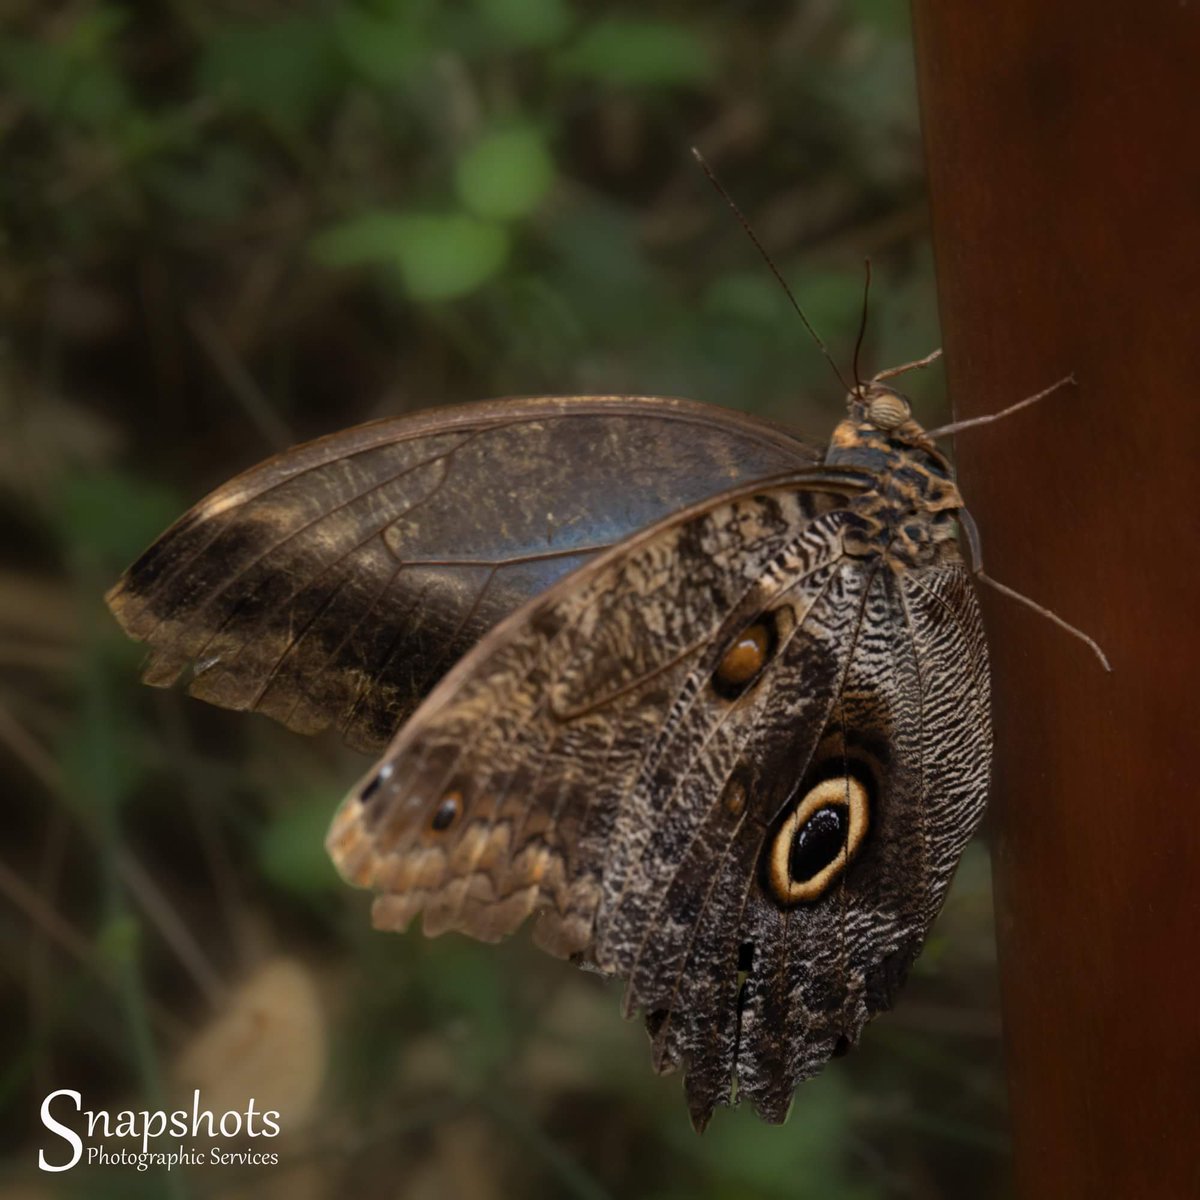 Day 271 - An actual butterfly this time

#day271 #365dayphotochallenge #photooftheday #CanonEOS80D📷 #snapshotsps #snapshotsPhoto5 #photographicrestorations #creativephotography #butterfly #canonEF2470F4L #stratfordbutterflyfarm